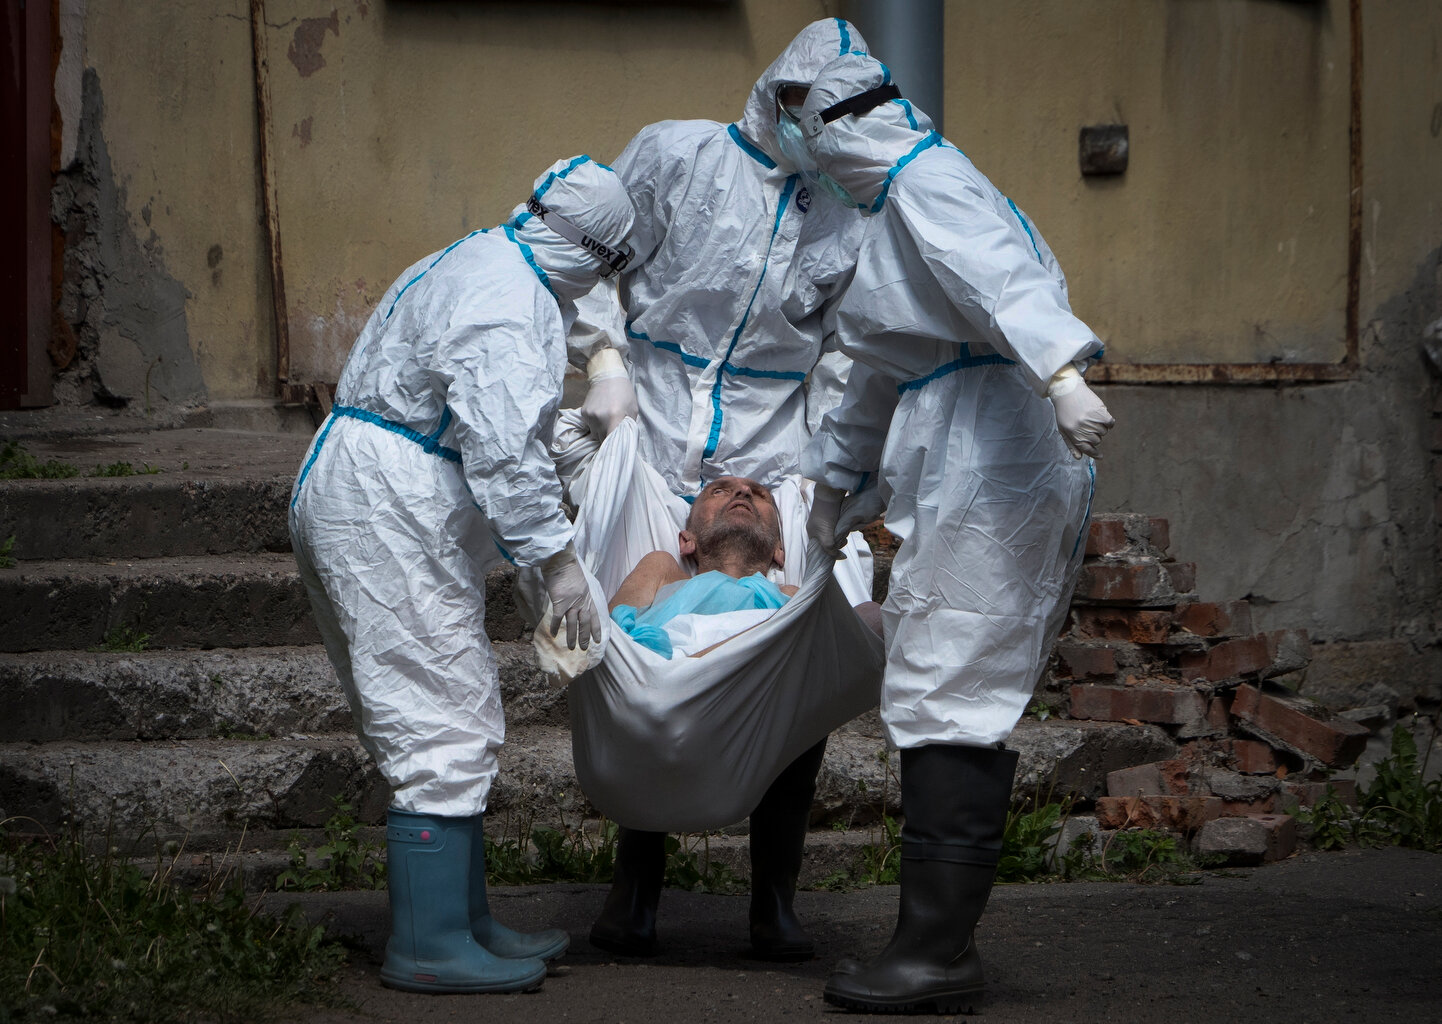  Medical workers wearing protective gear to protect against coronavirus infection, carry a patient at infectious diseases hospital where patients with coronavirus are treated in St.Petersburg, Russia, Wednesday, June 3, 2020. (AP Photo/Dmitri Lovetsk